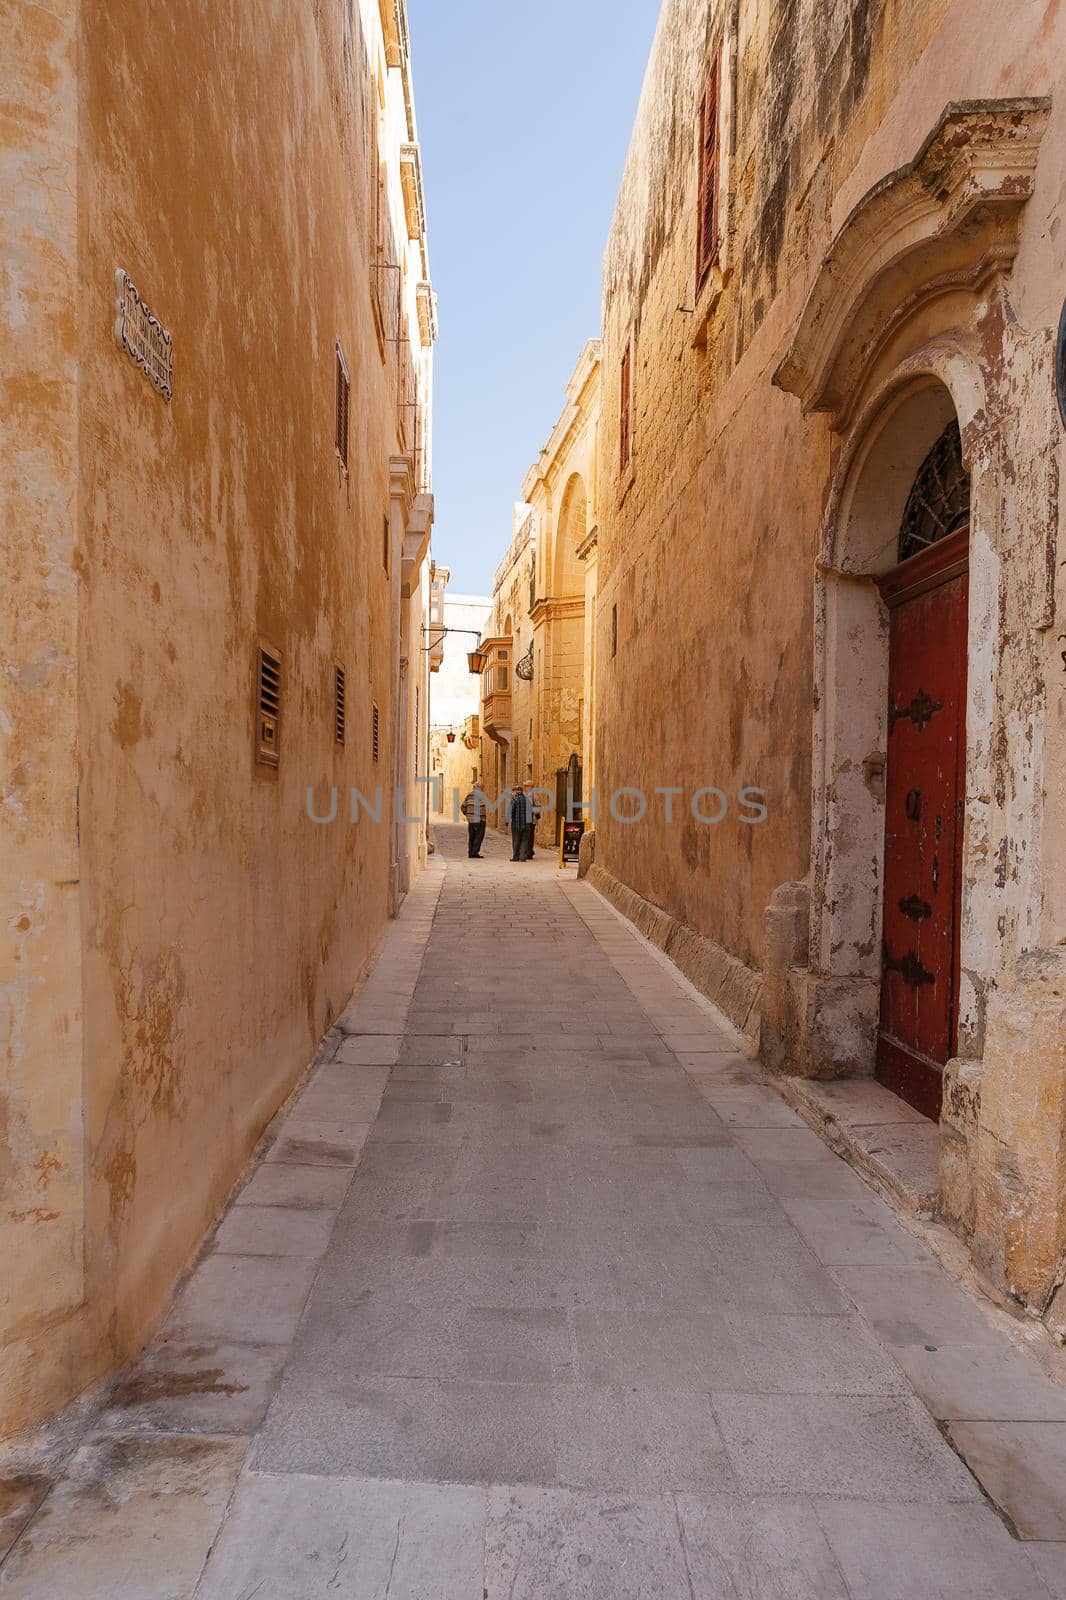 MDINA, MALTA - February 18, 2010. Local old men on narrow street of Mdina, old capital of Malta. Stone buildings with old fashioned doors and balconies. by aksenovko